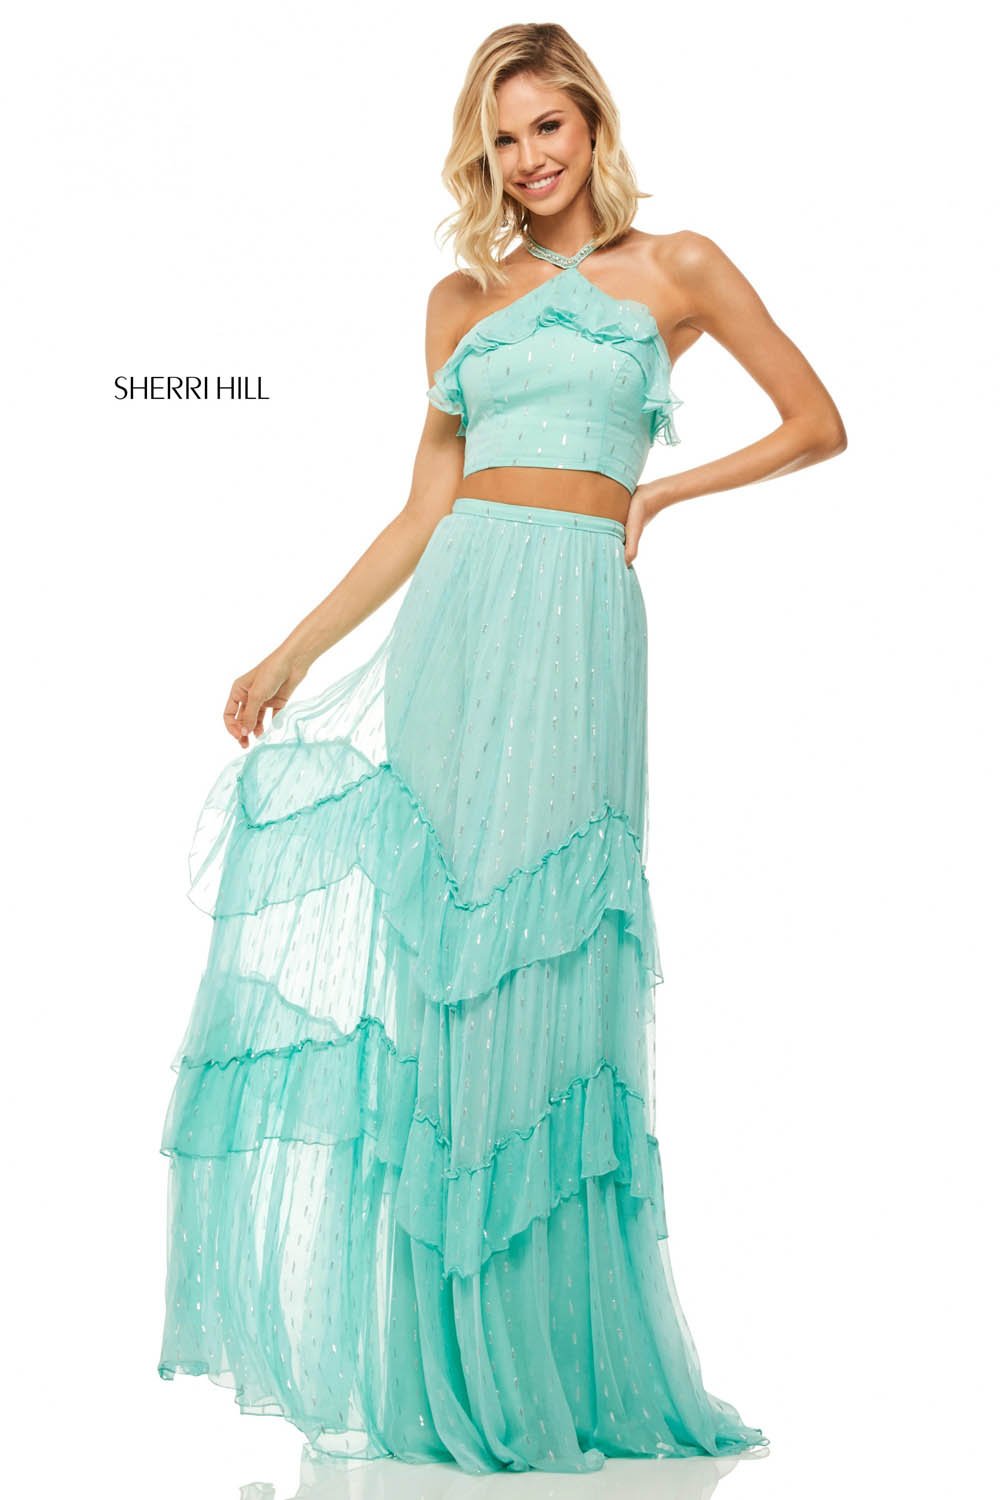 Sherri Hill 52798 dress images in these colors: Black, Aqua, Yellow, Light Blue, Lilac, Ivory, Navy, Fuchsia, Emerald, Light Pink, Turquoise, Orange, Red.